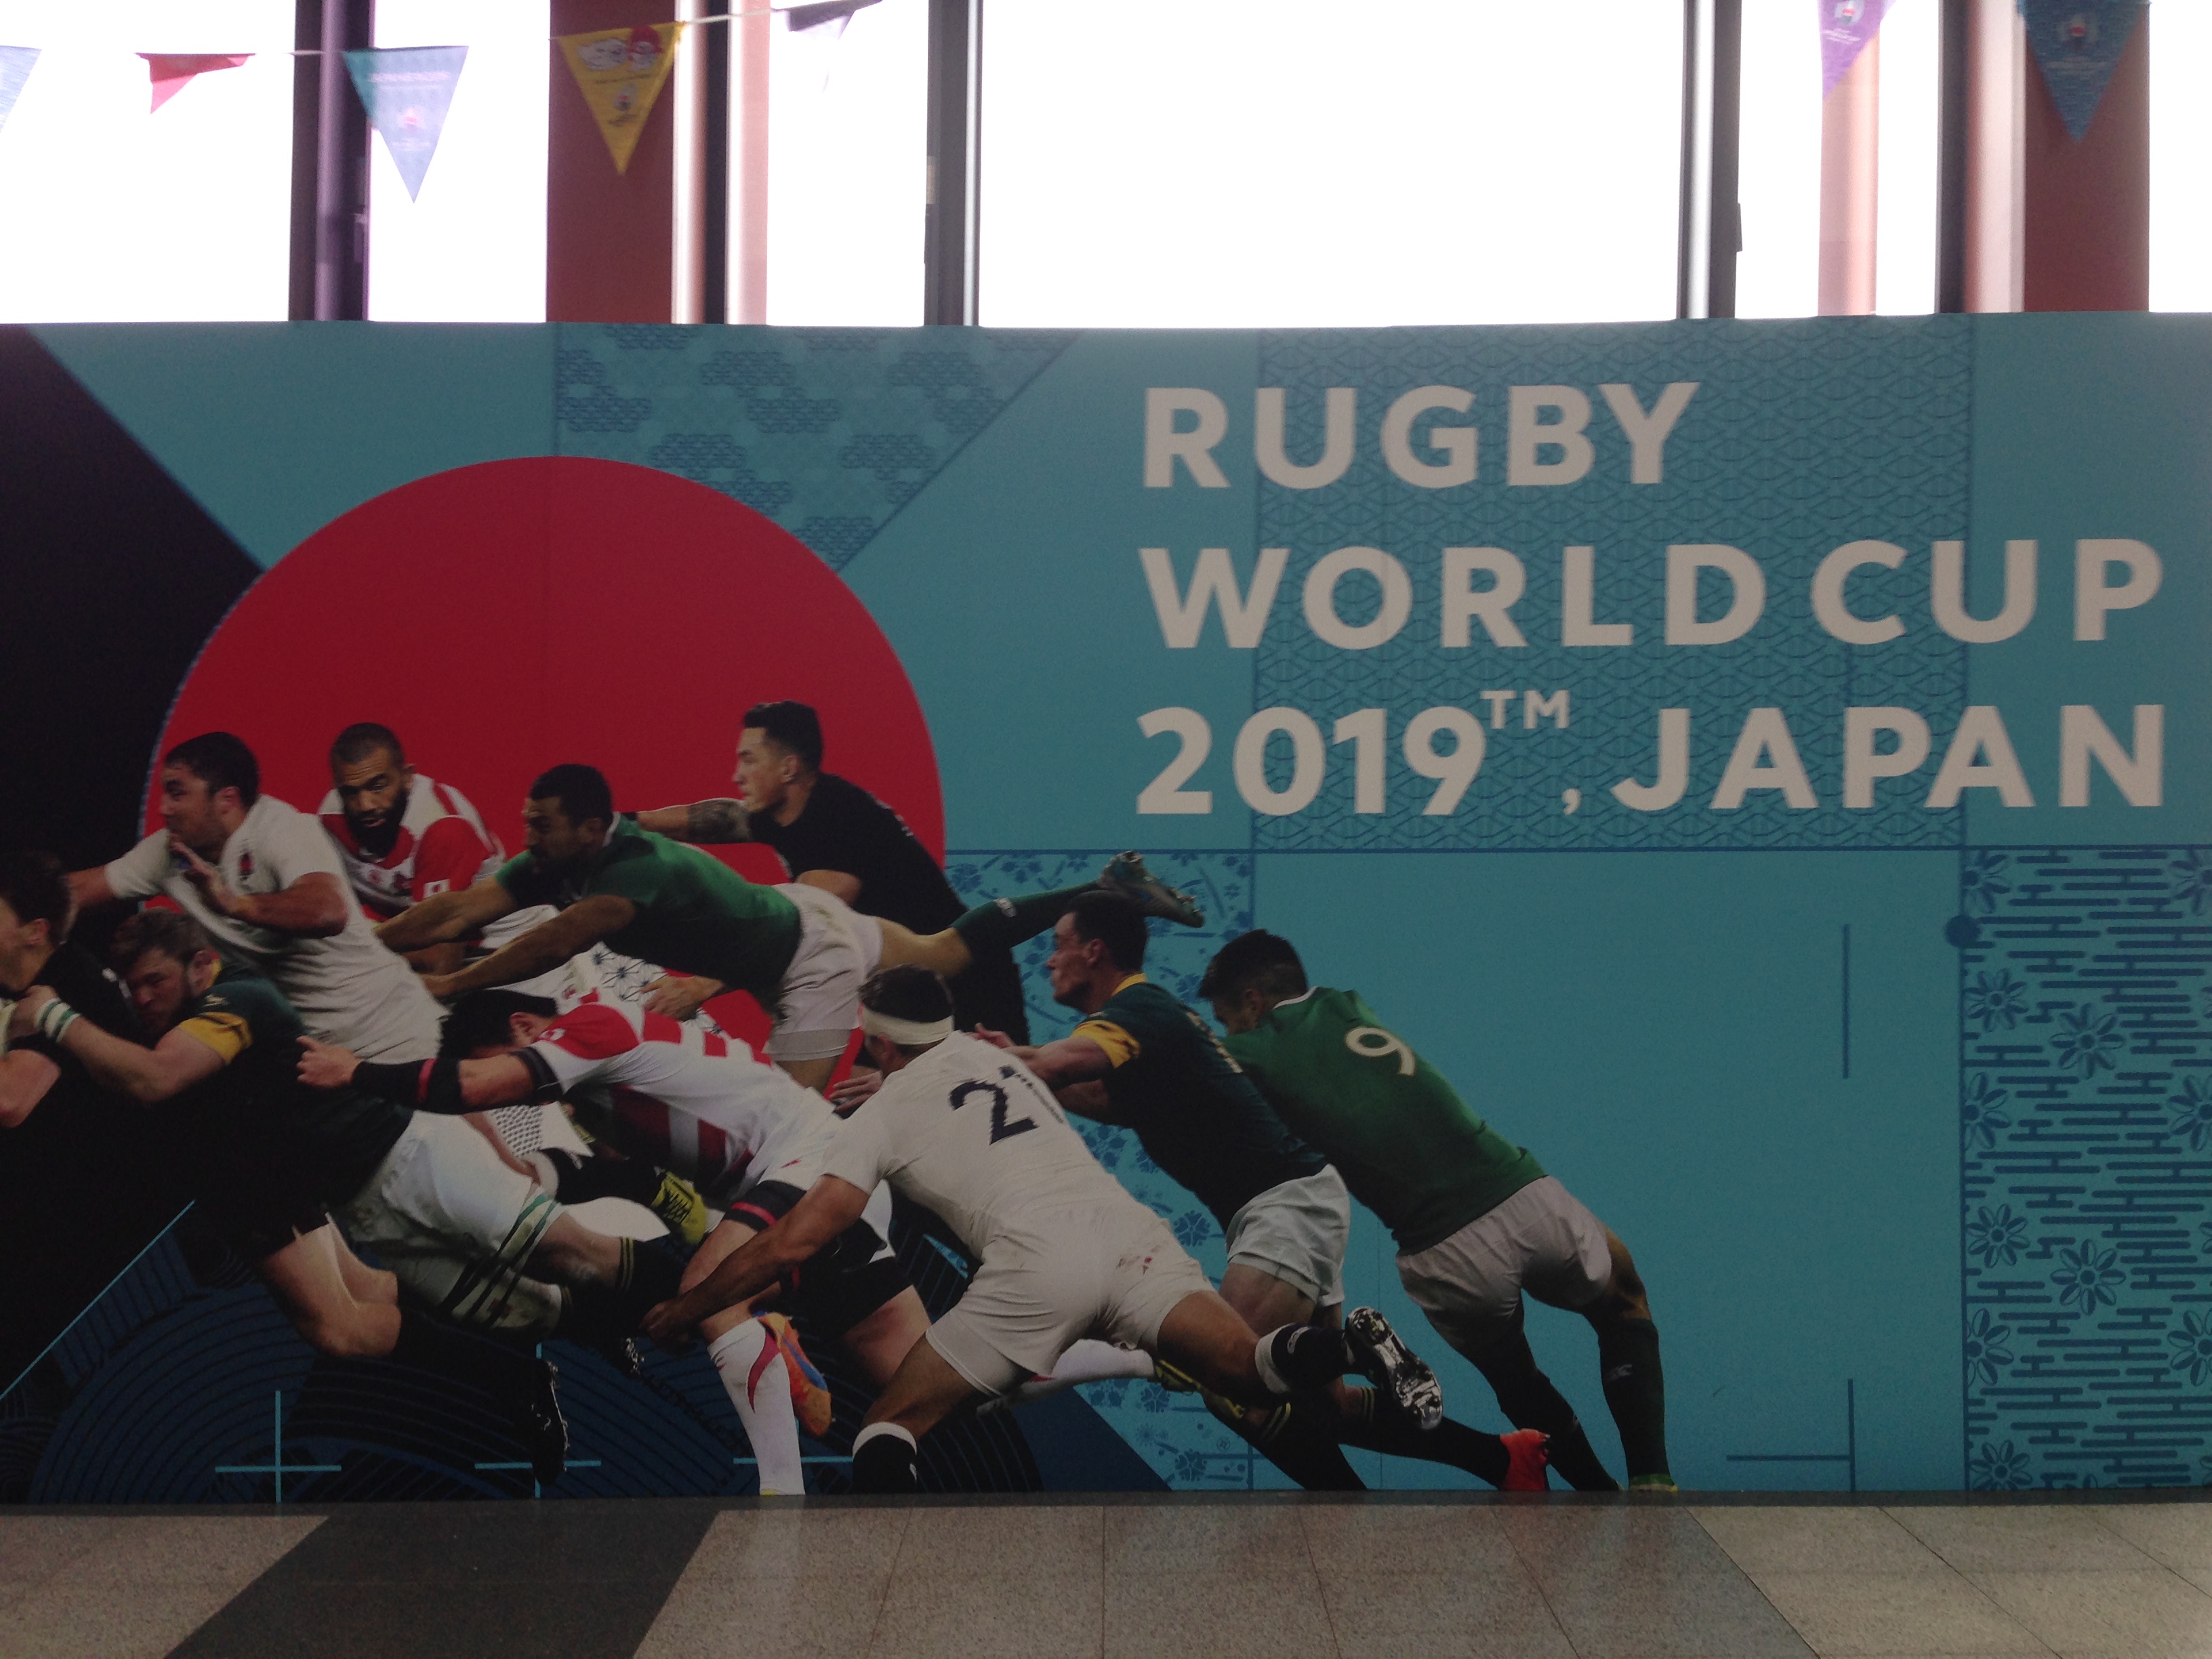 Rugby World Cup 2019 in Japan